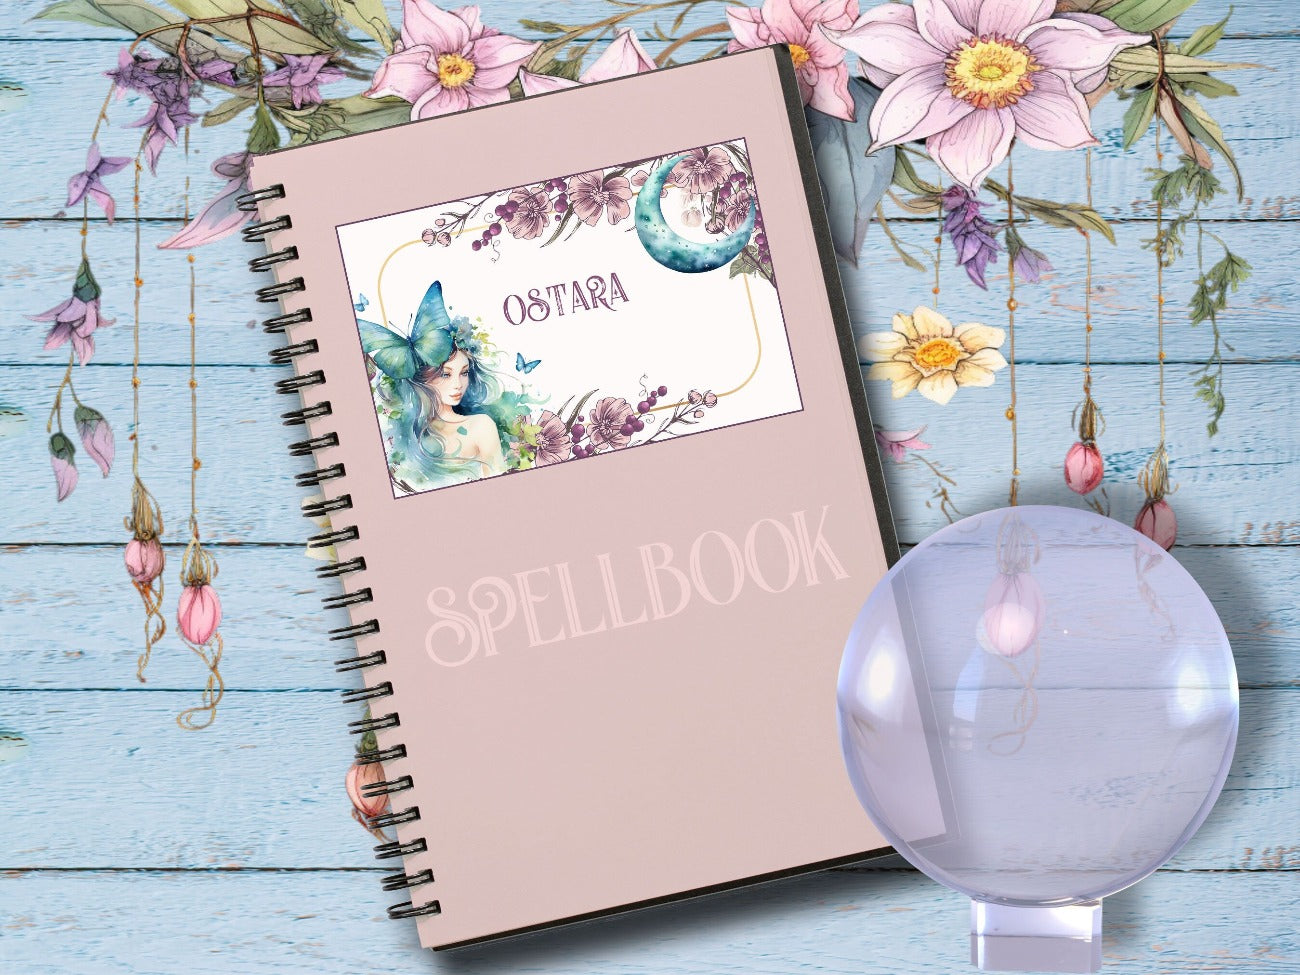 Large Ostara Label is glued to a pretty pink journal spellbook - Morgana Magick Spell